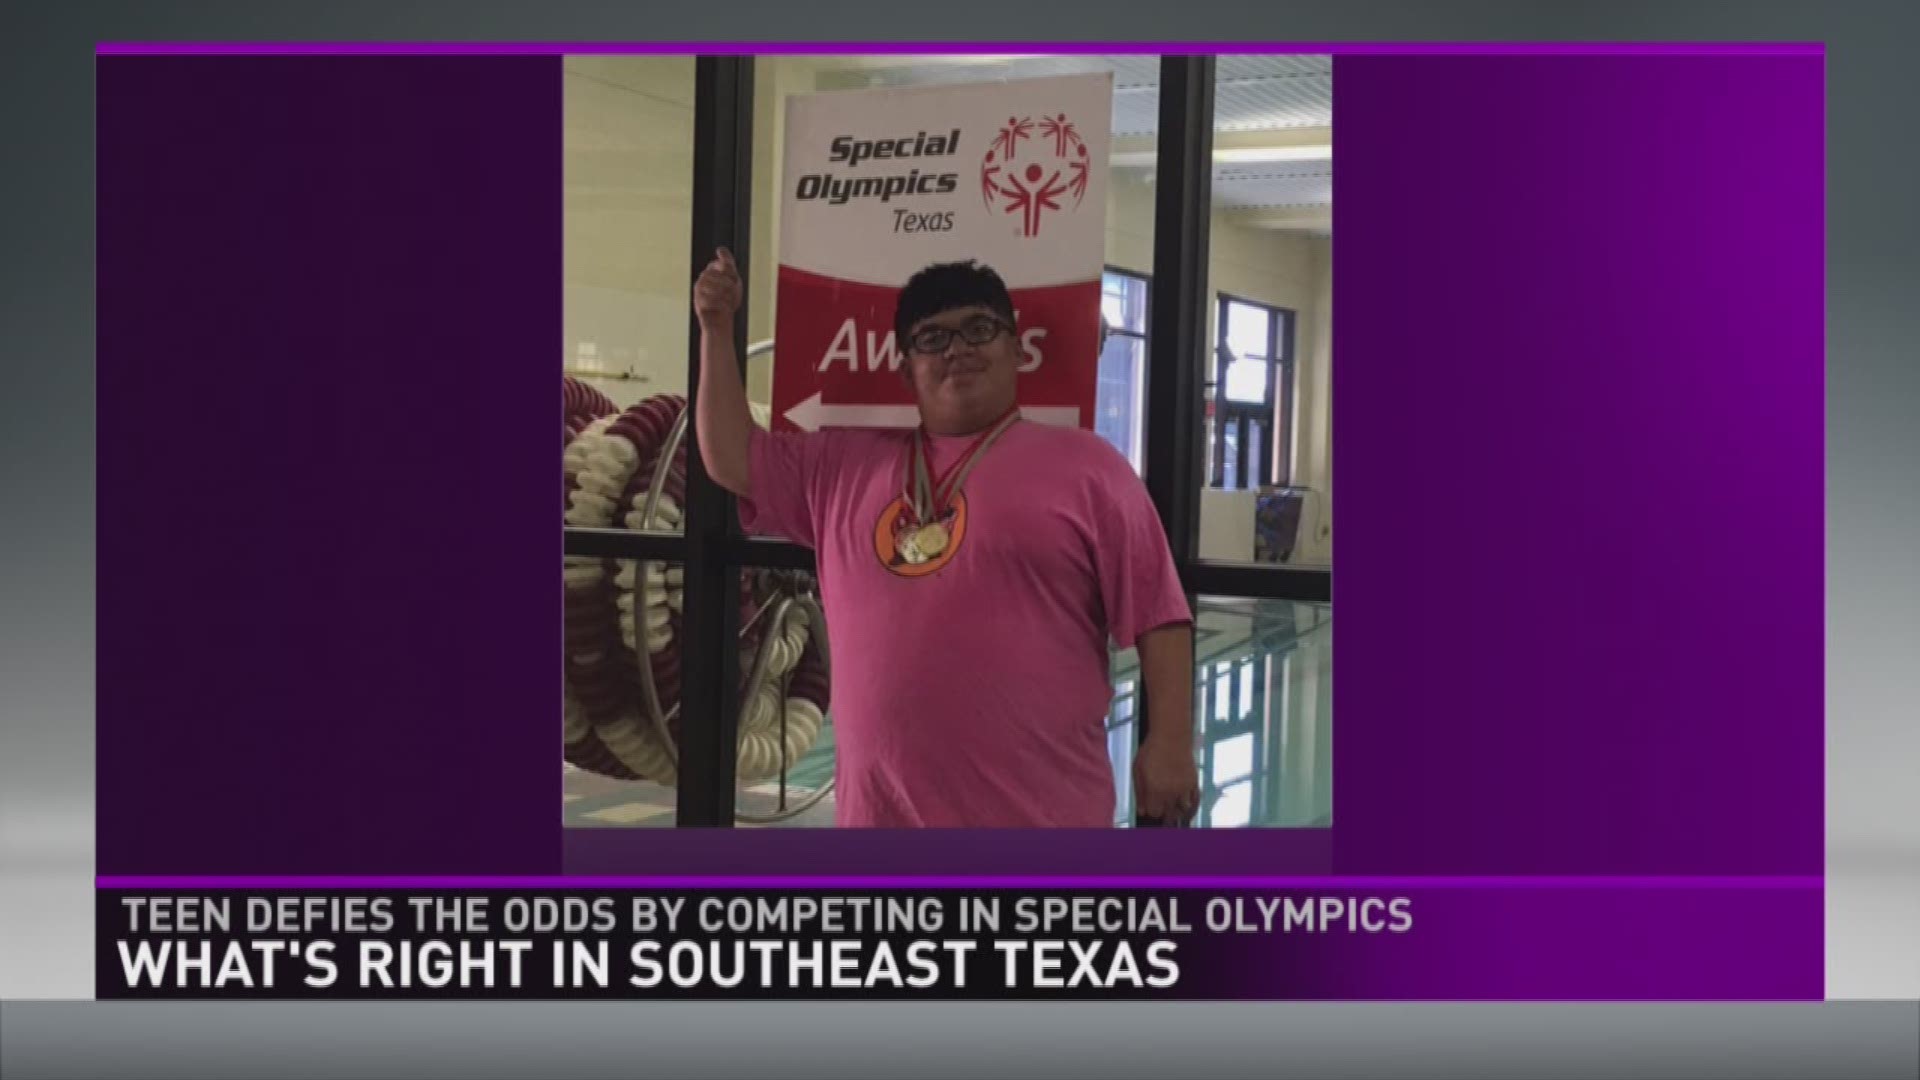 This Bridge City teen is "what's right in Southeast Texas" this week!